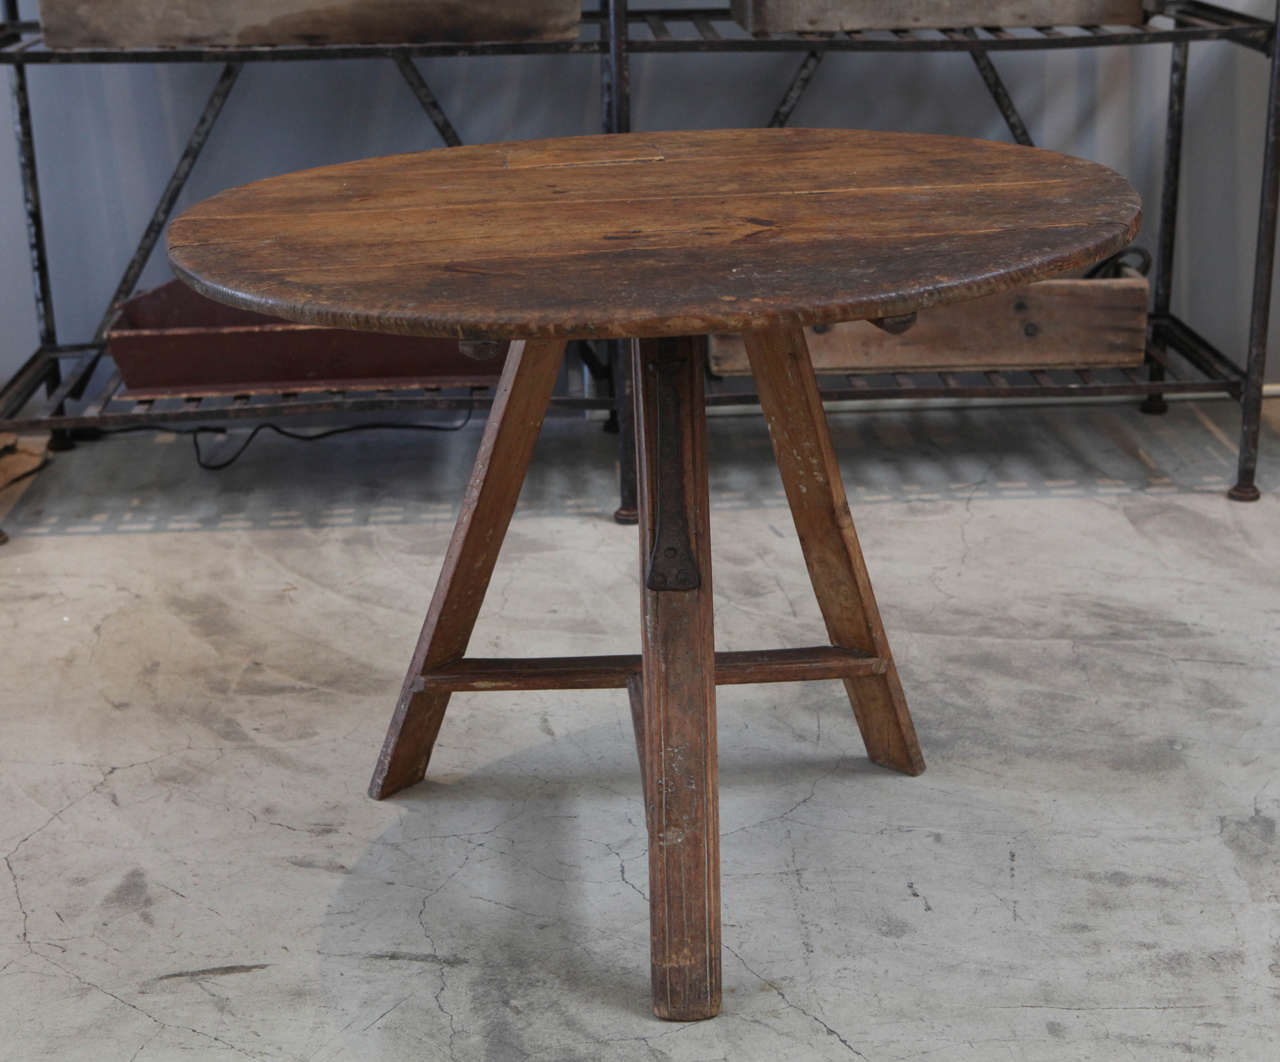 A primitive walnut table from Sweden, completely sturdied and useable as either a side or entry.